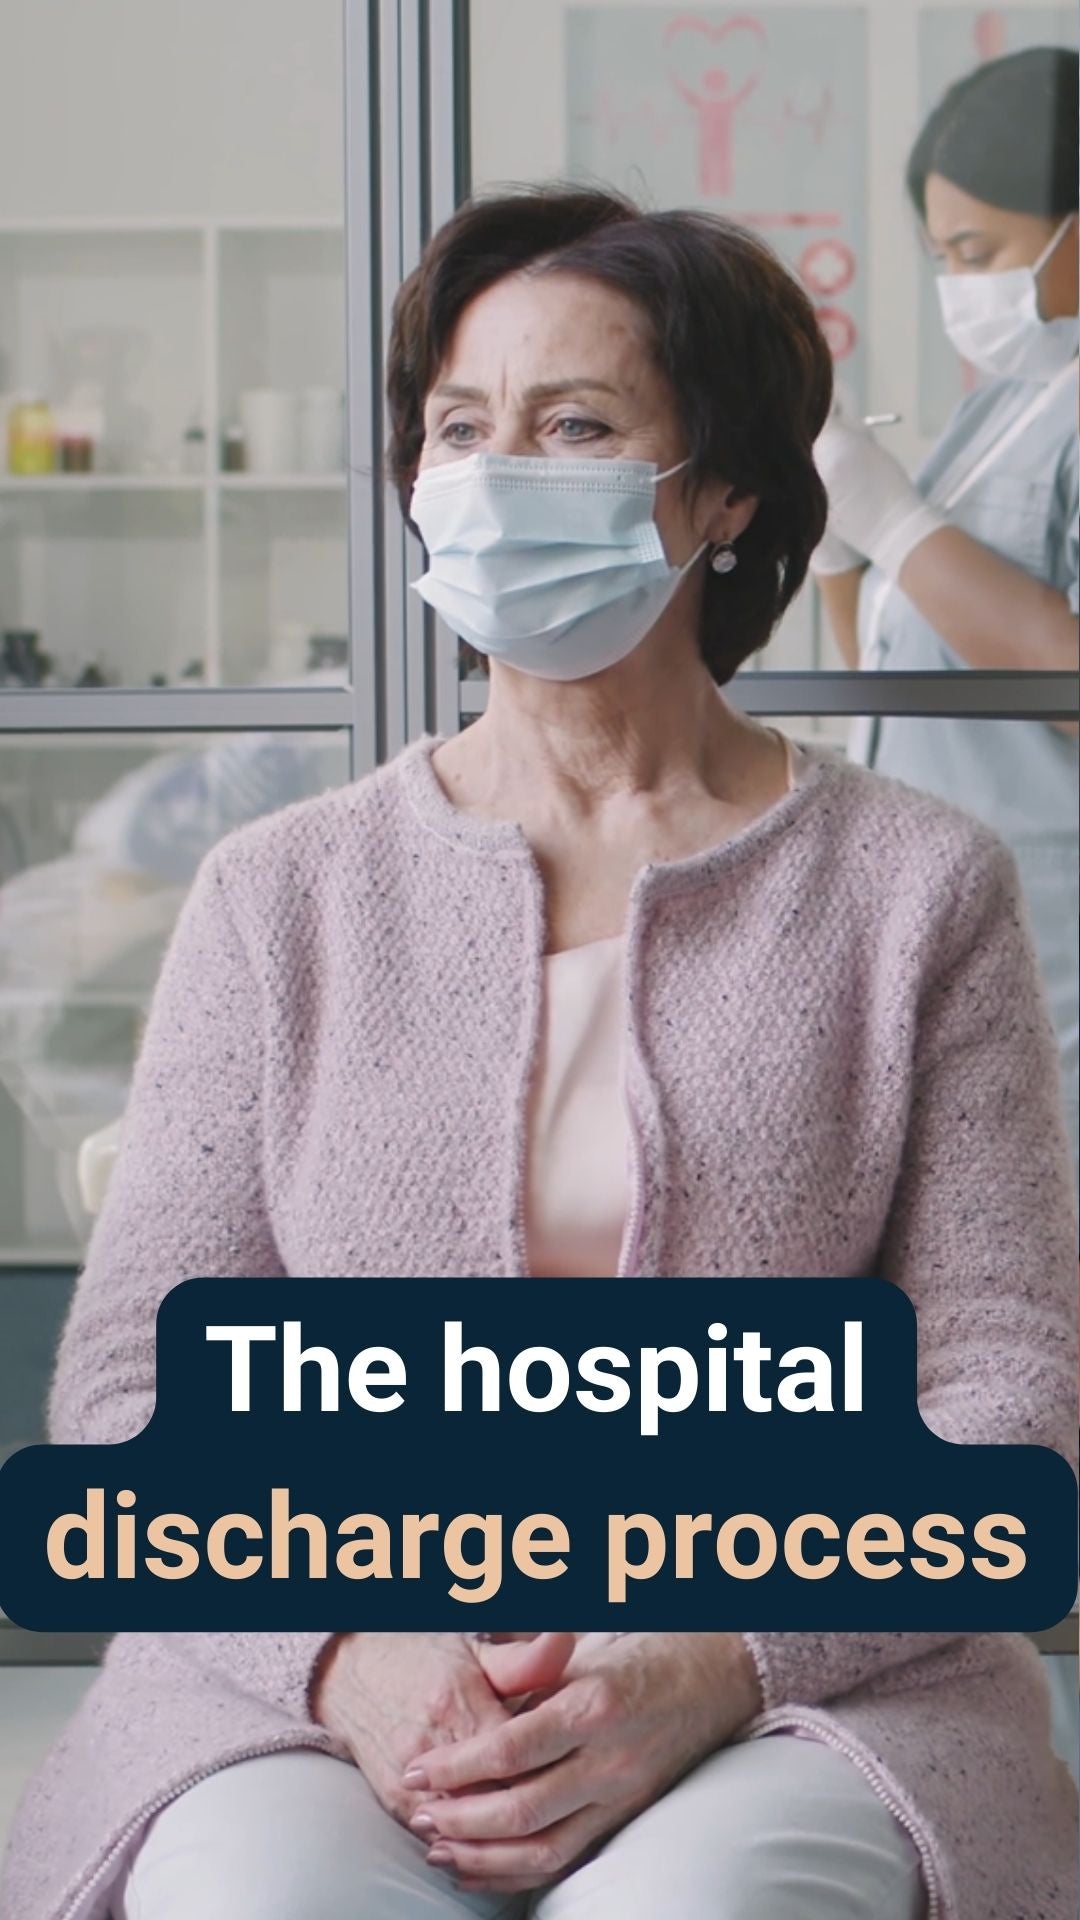 A lady sat in hospital wearing a face mask with the caption 'The hospital discharge process'